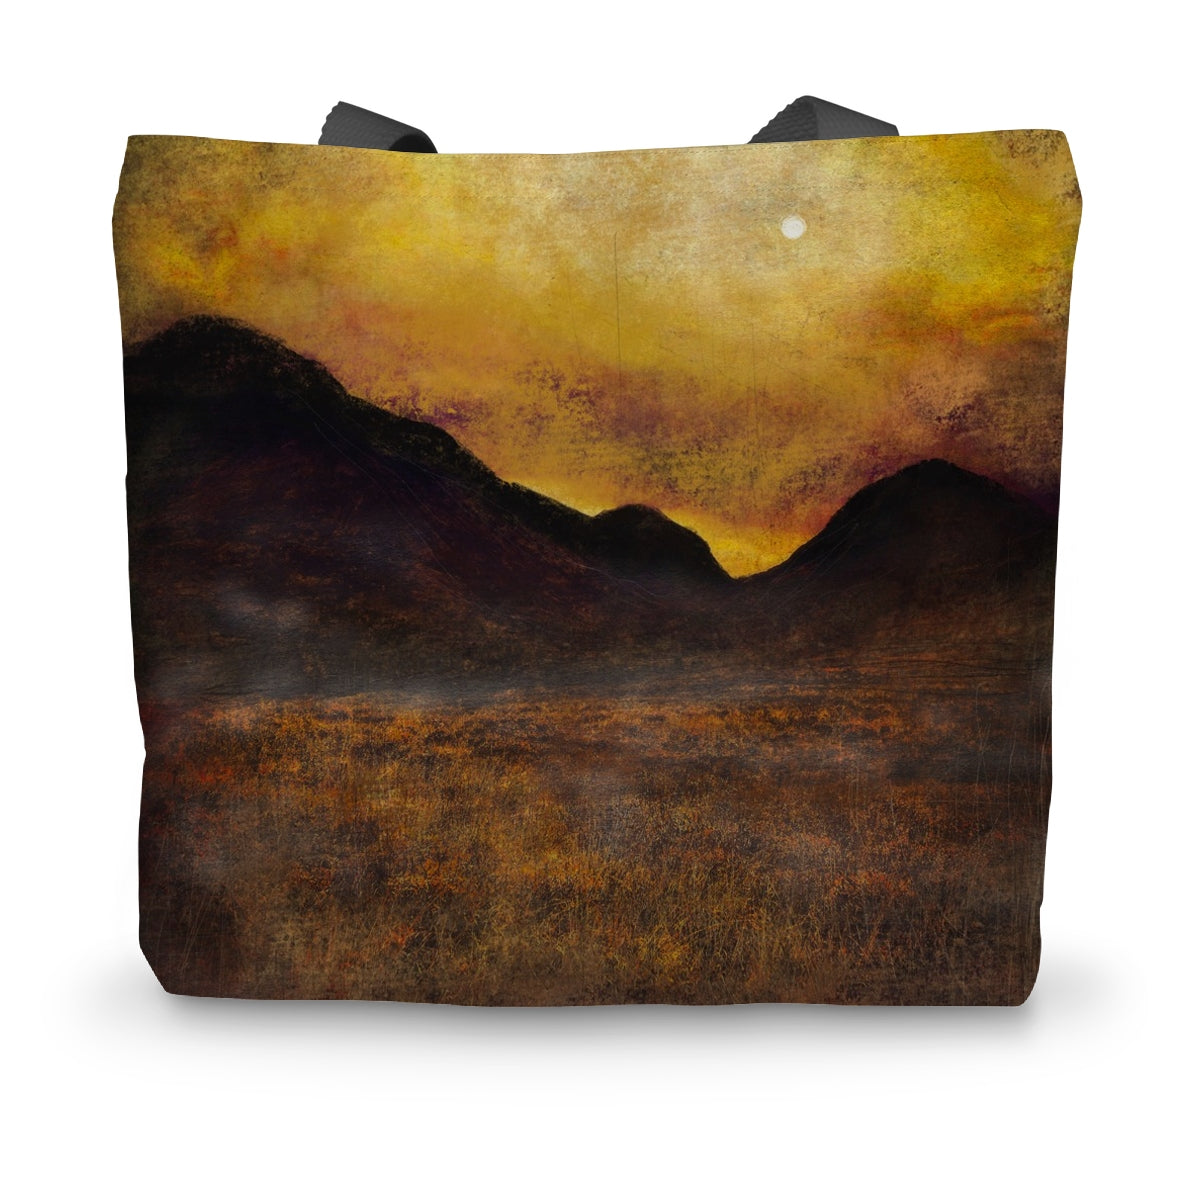 Glencoe Moonlight Art Gifts Canvas Tote Bag-Bags-Glencoe Art Gallery-14"x18.5"-Paintings, Prints, Homeware, Art Gifts From Scotland By Scottish Artist Kevin Hunter